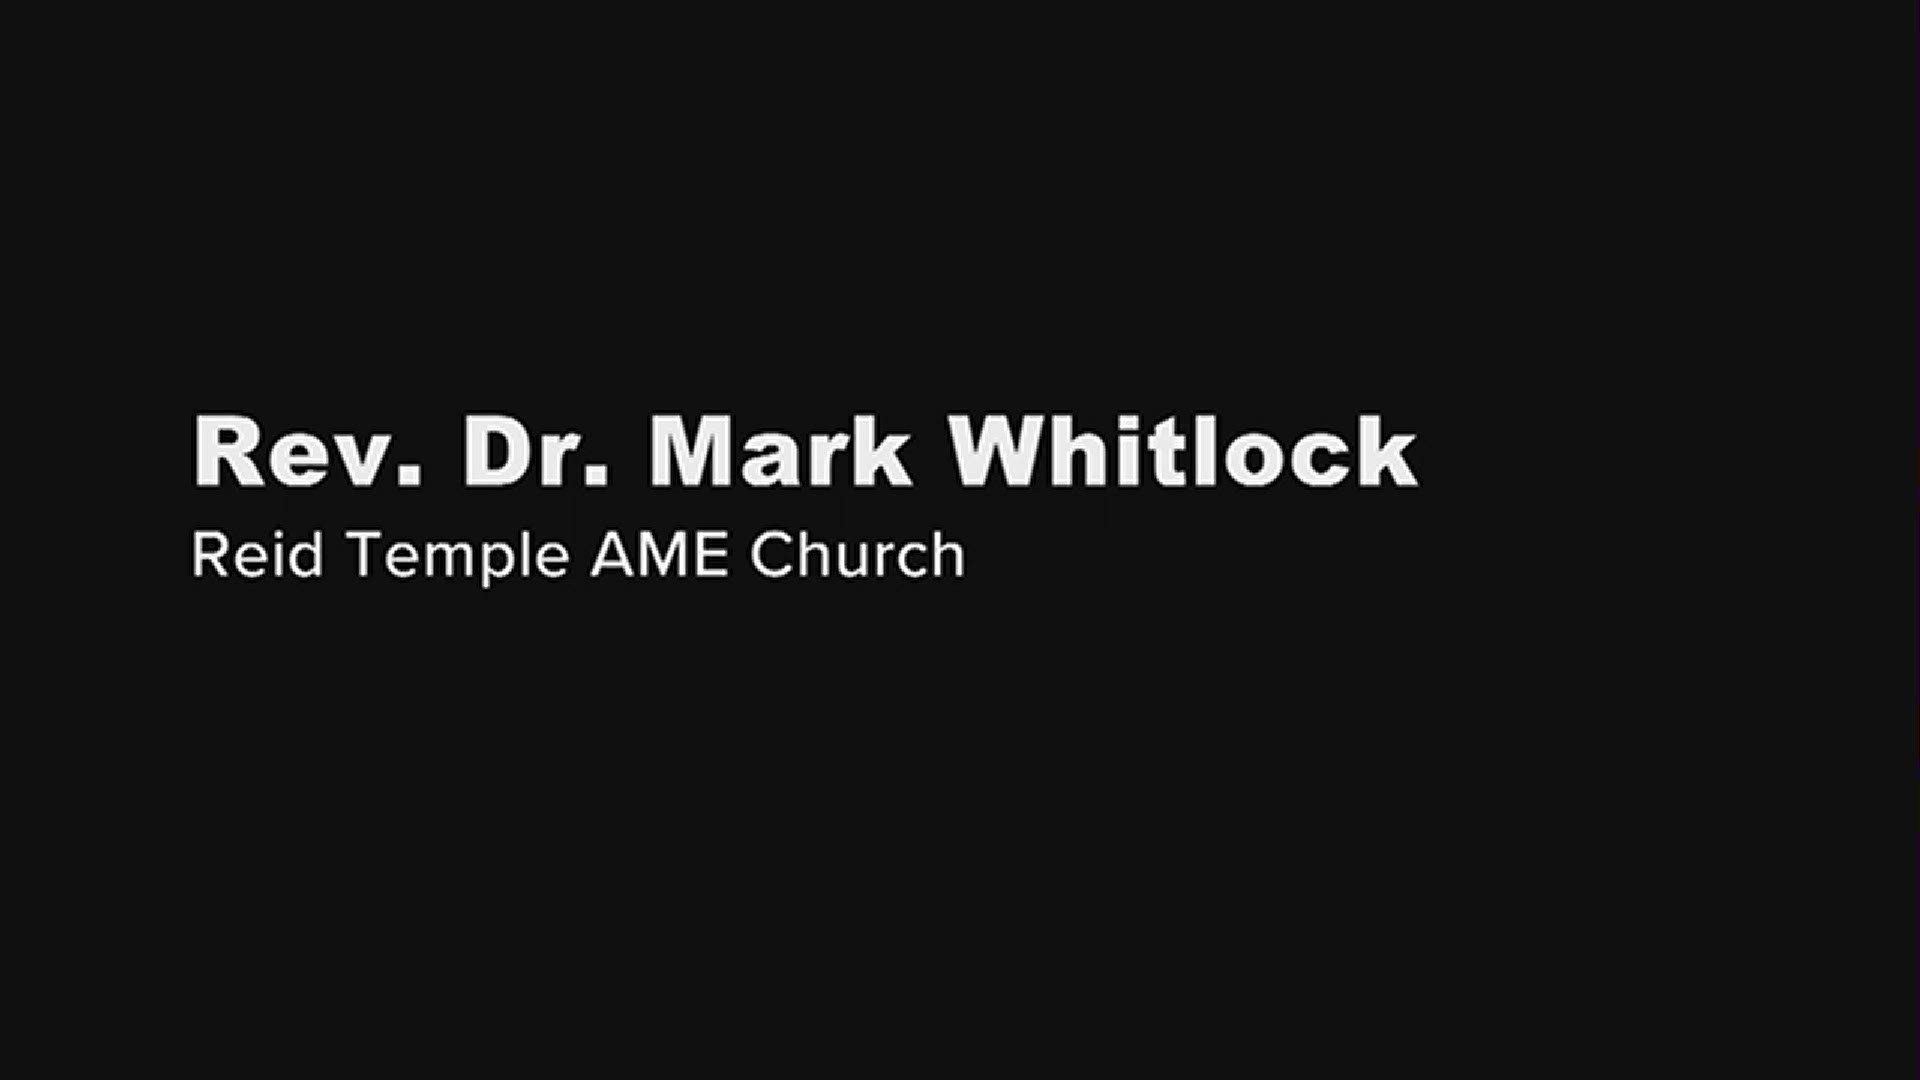 Rev. Dr. Mark Whitlock, of Reid Temple AME Church, details the concerns some people of color have about mail-in voting.